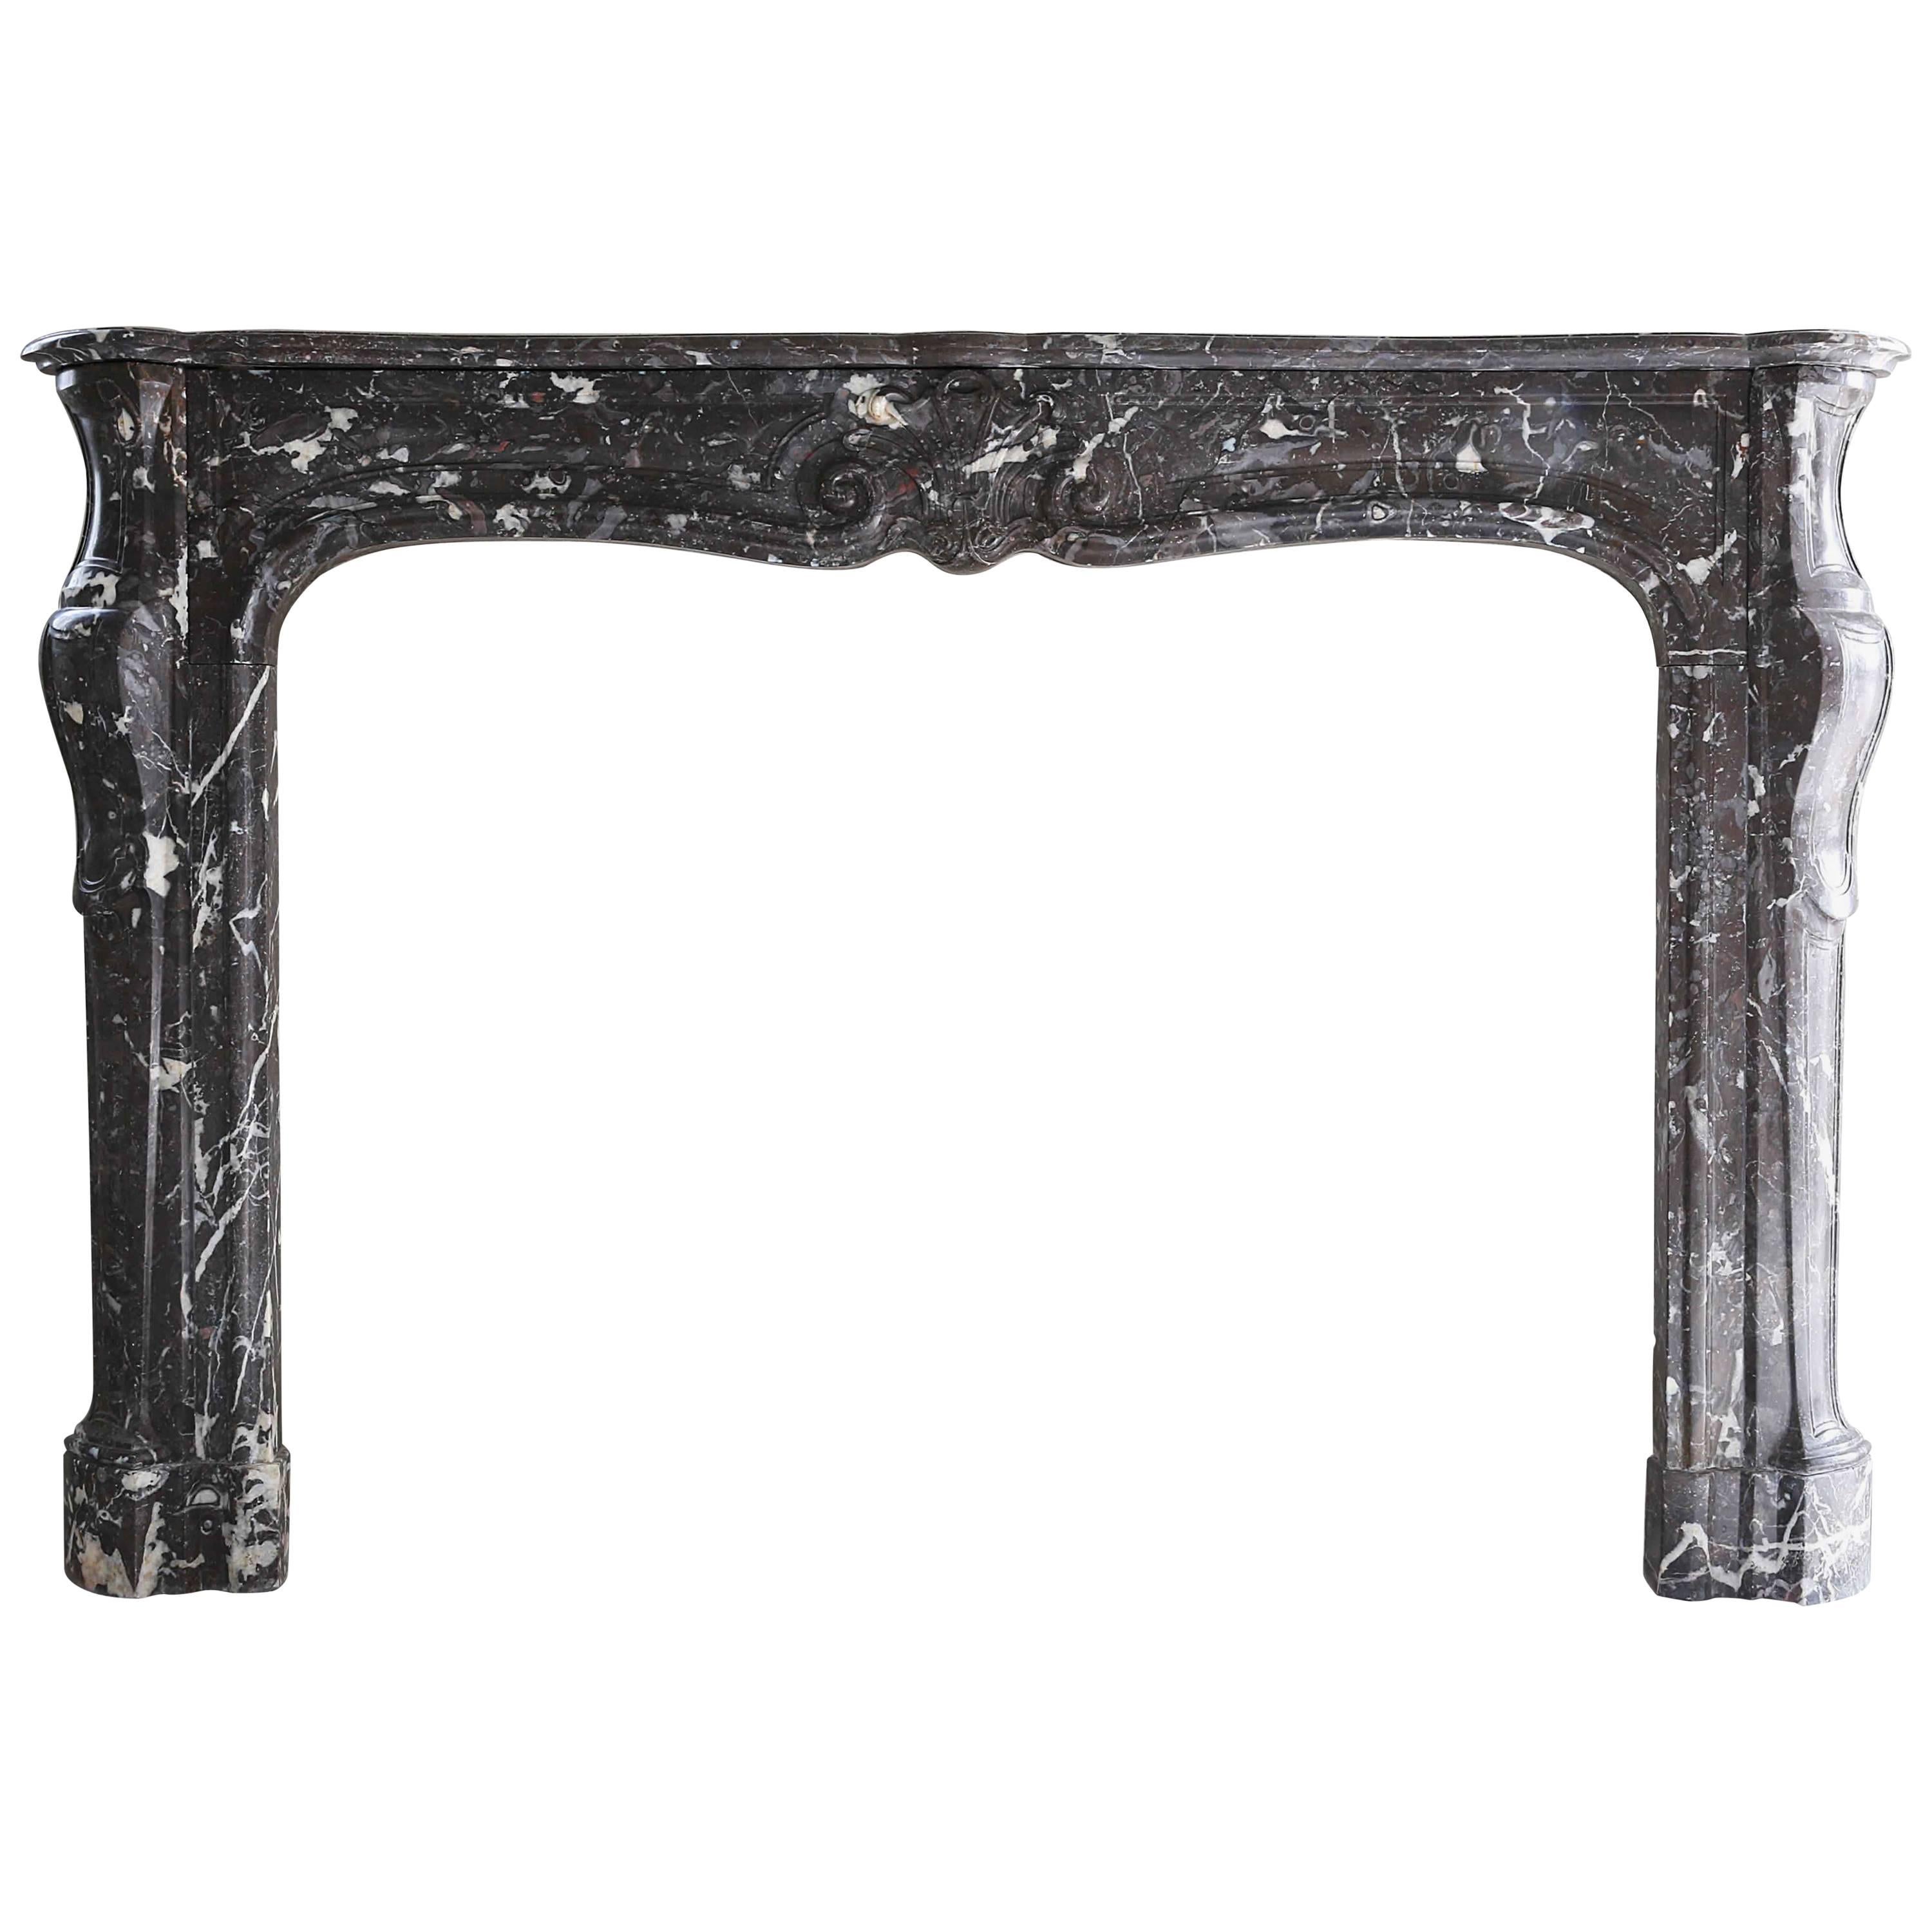 Antique Marble Fireplace, Louis XV Style, Kind of Marble Is Saint-Anna